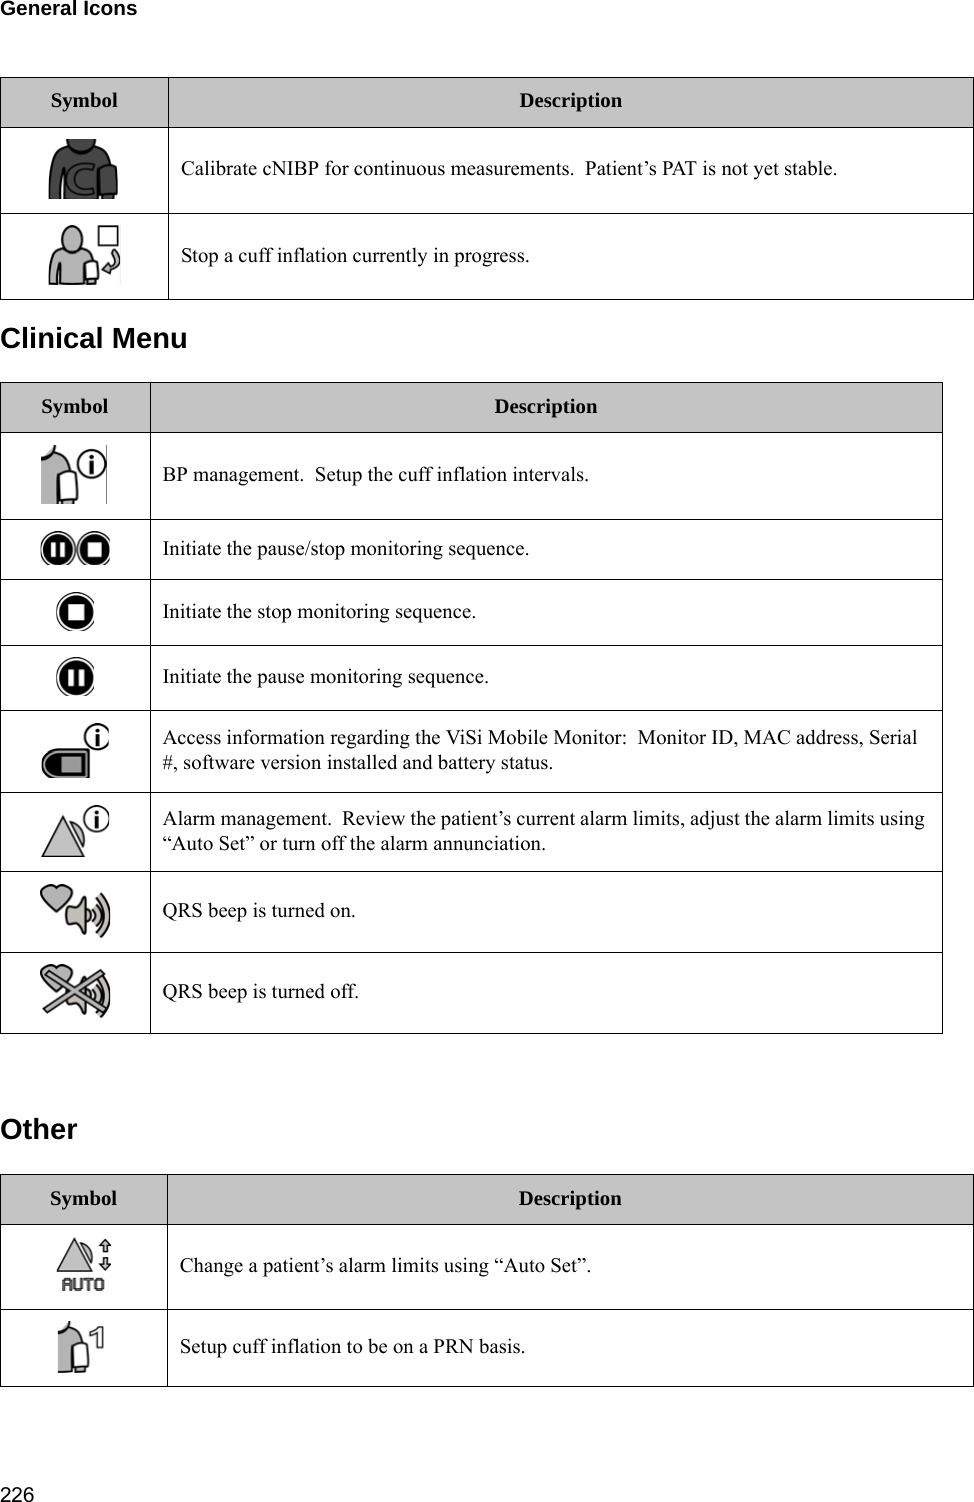 General Icons 226Clinical MenuOtherCalibrate cNIBP for continuous measurements.  Patient’s PAT is not yet stable.Stop a cuff inflation currently in progress.Symbol DescriptionBP management.  Setup the cuff inflation intervals.Initiate the pause/stop monitoring sequence.Initiate the stop monitoring sequence.Initiate the pause monitoring sequence.Access information regarding the ViSi Mobile Monitor:  Monitor ID, MAC address, Serial #, software version installed and battery status.Alarm management.  Review the patient’s current alarm limits, adjust the alarm limits using “Auto Set” or turn off the alarm annunciation.QRS beep is turned on.QRS beep is turned off.Symbol DescriptionChange a patient’s alarm limits using “Auto Set”.Setup cuff inflation to be on a PRN basis.Symbol Description